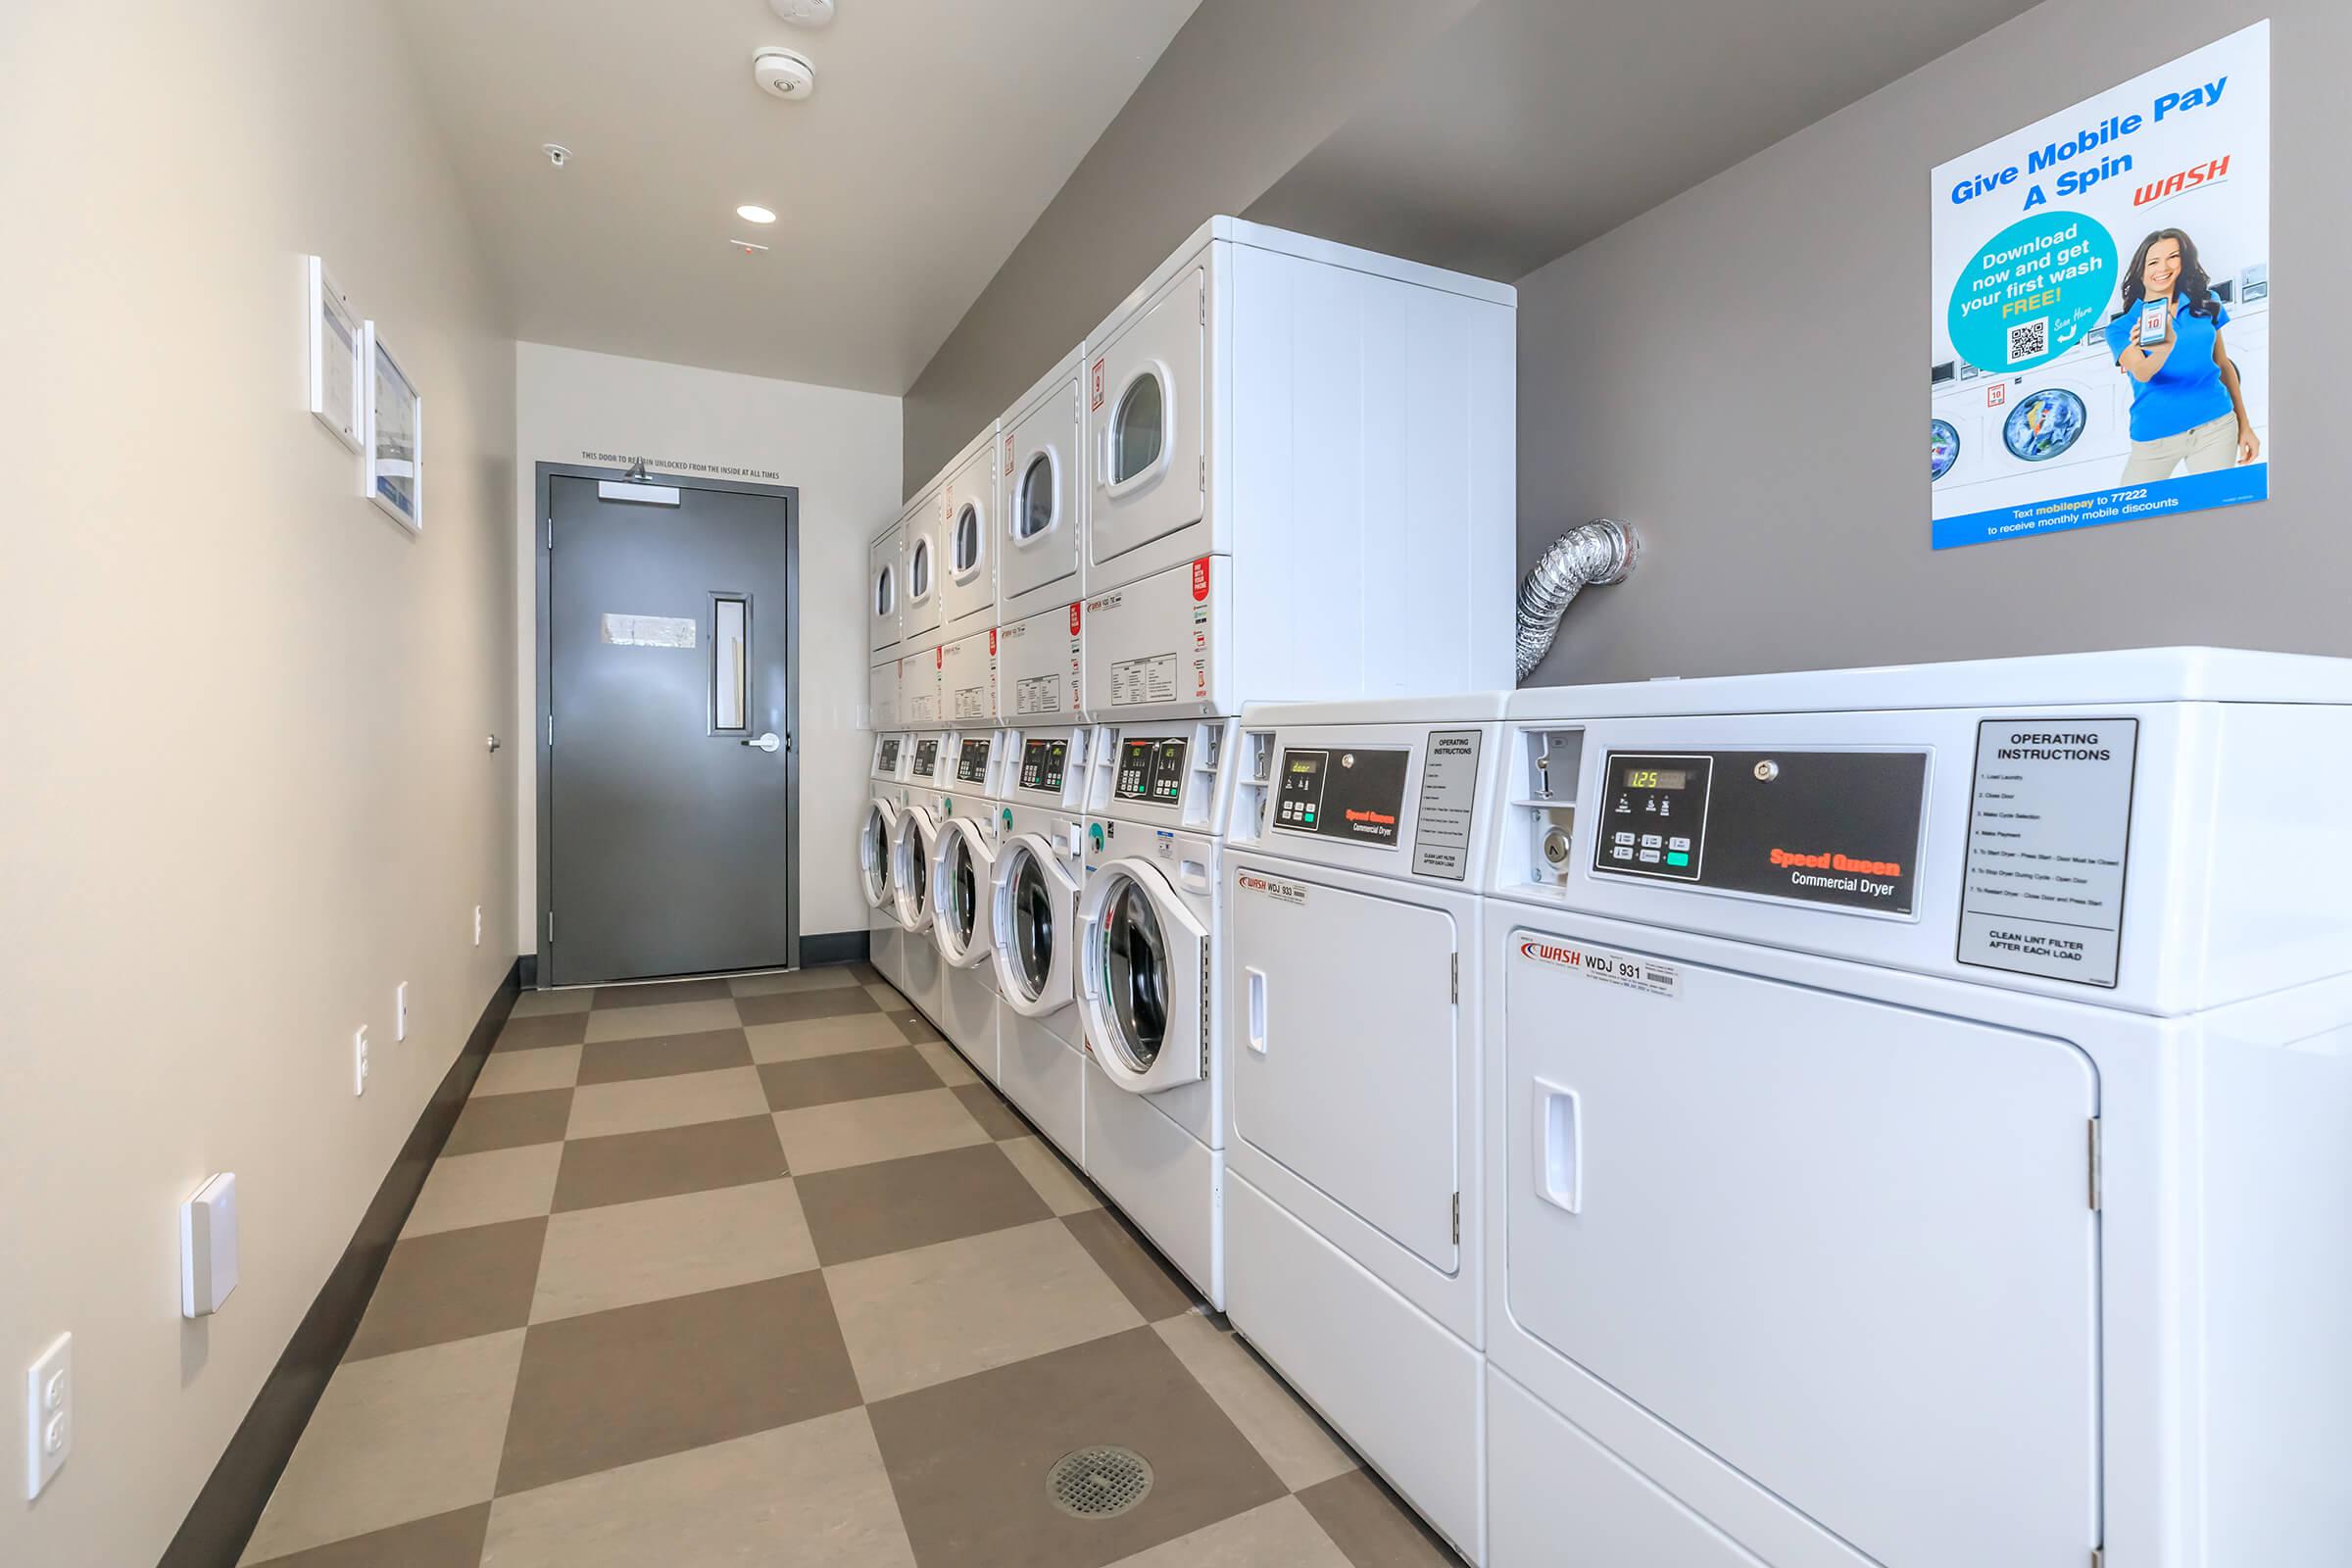 Laundry Room - Washers and dryers.